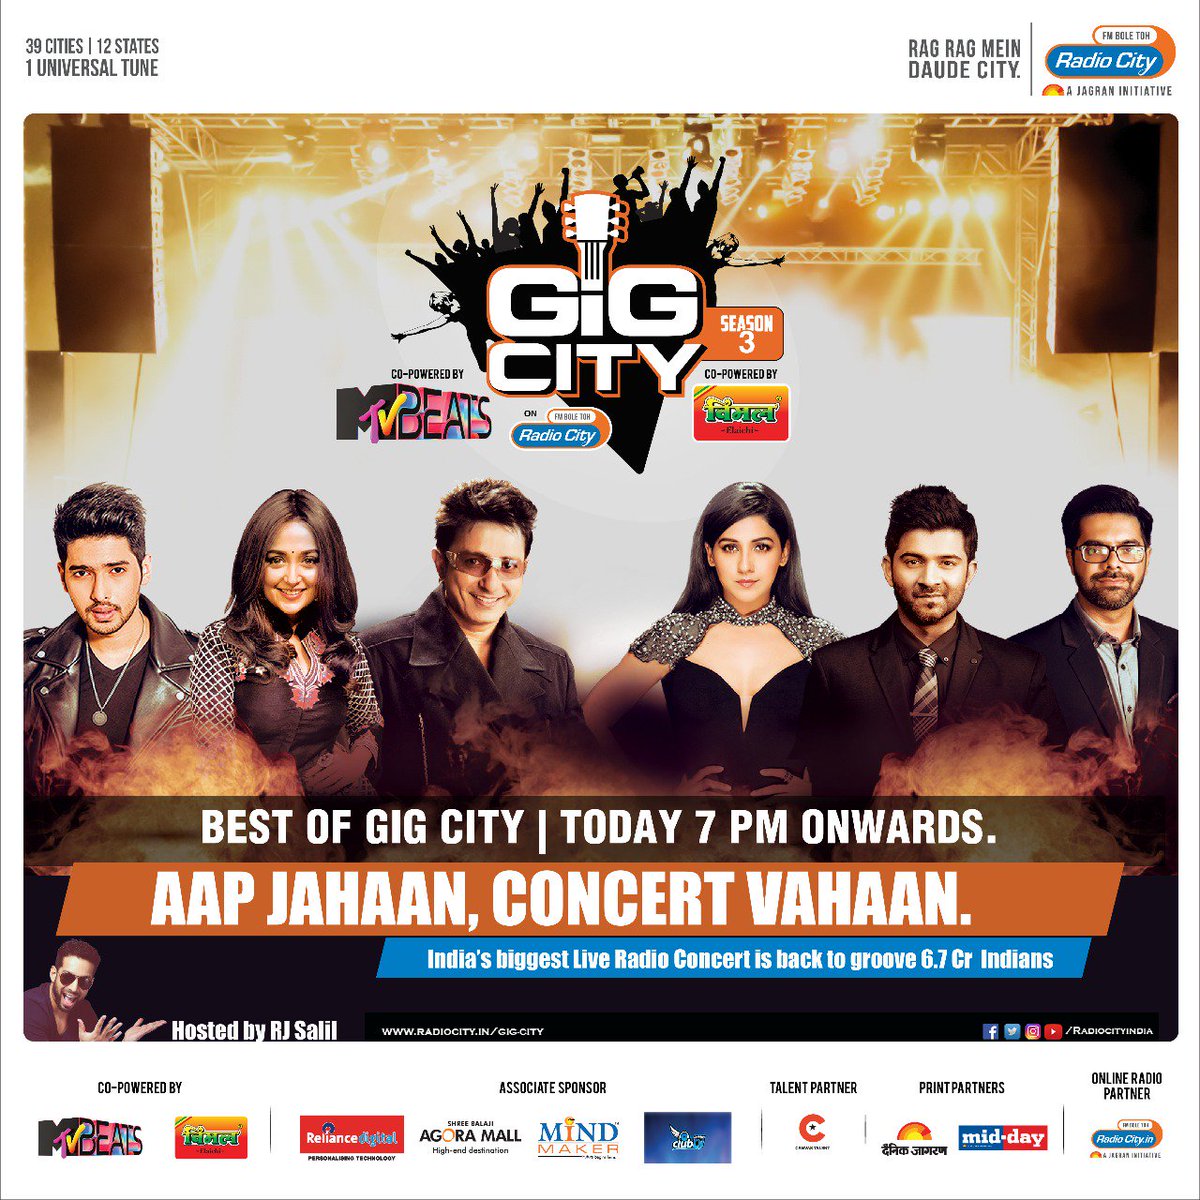 Best of #GigCity3 is here, where some of the handpicked songs for our lovely audience! Can't wait to listen to it. What about you? #GigCity3 @radiocityindia @MTVBeats @canvas_talent @sukhimusic @ArmaanMalik22 @neetimohan18 @Soulfulsachin @monalithakur03